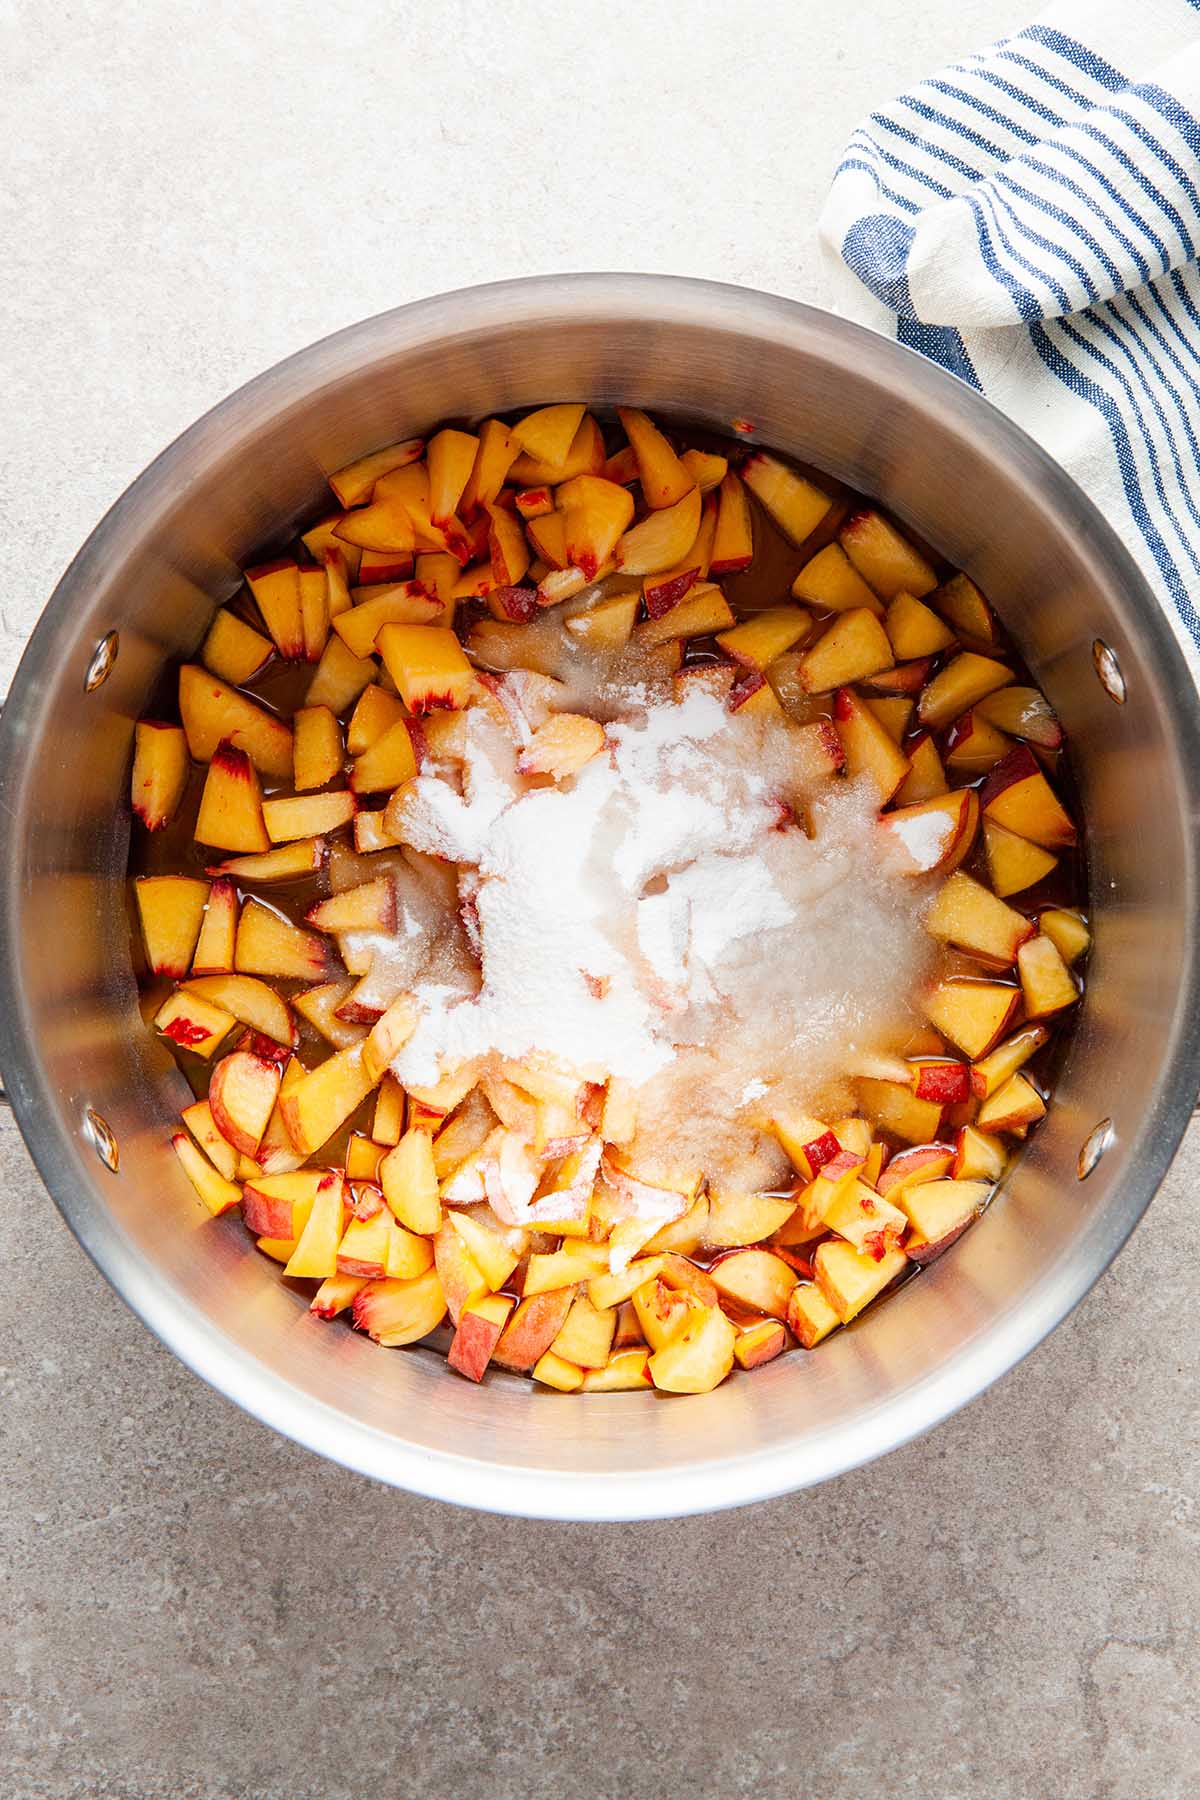 Chopped peaches, sugar, and maple syrup in a pot.